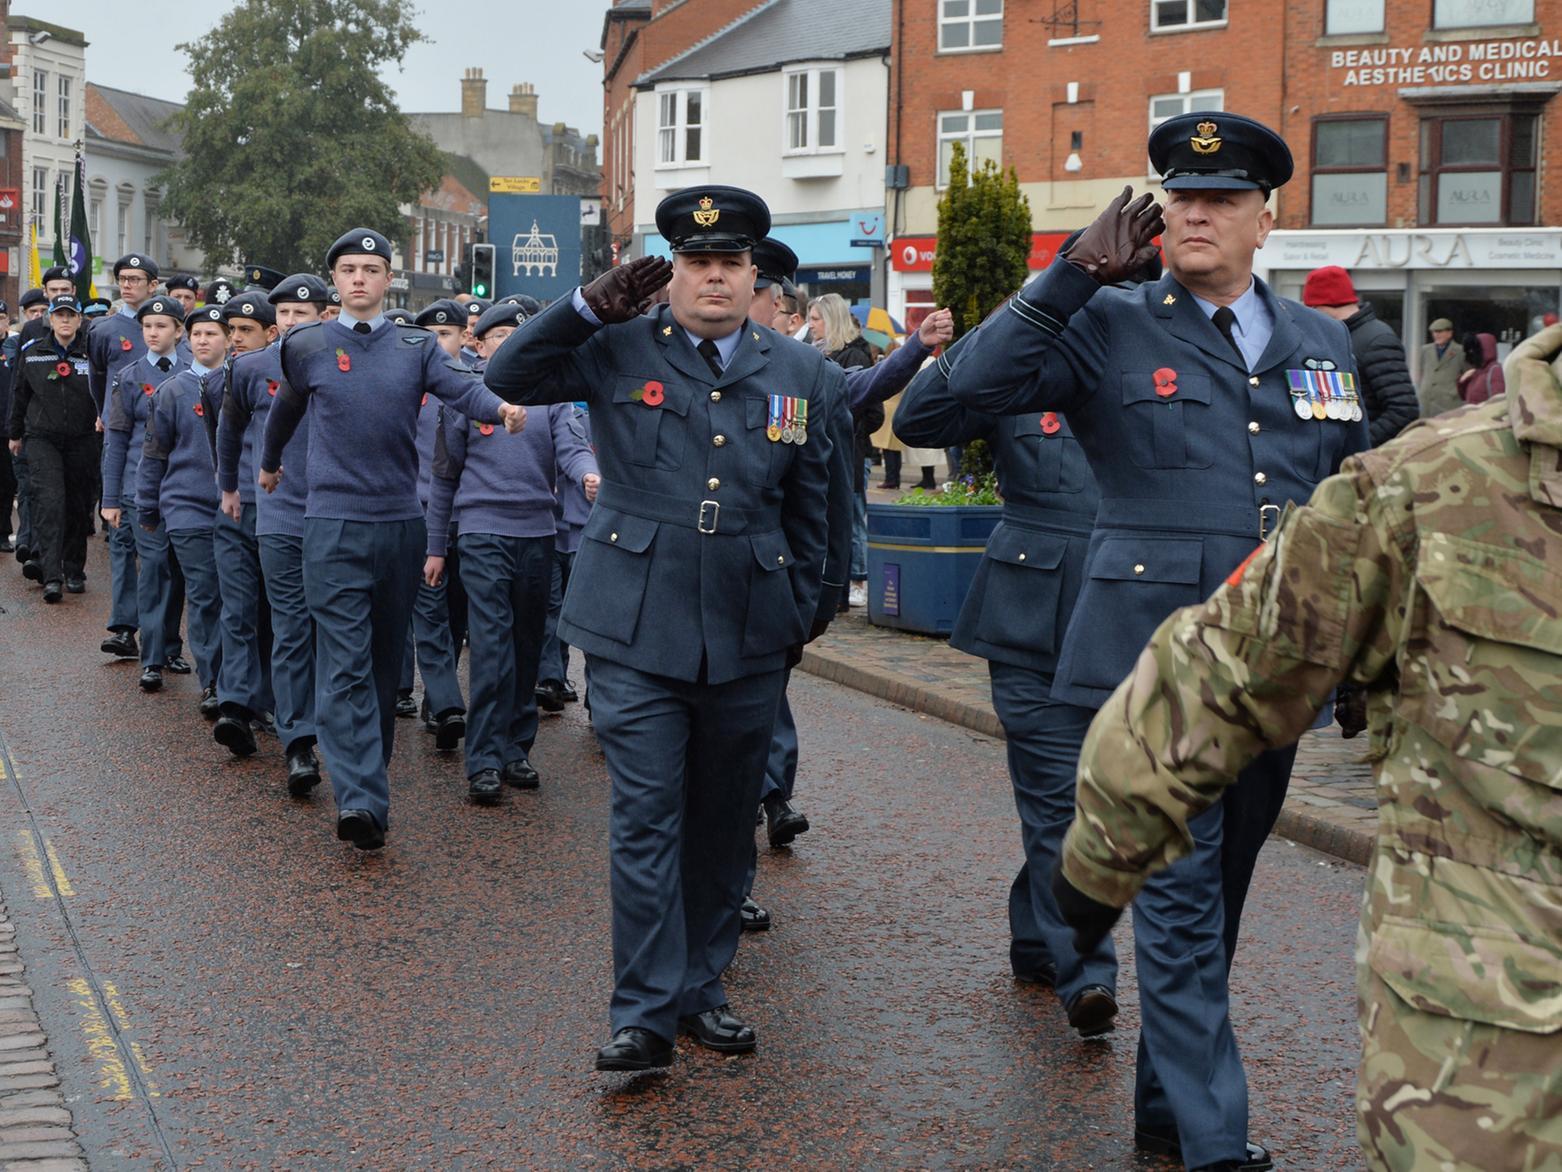 The remembrance parade makes its way to the Square.